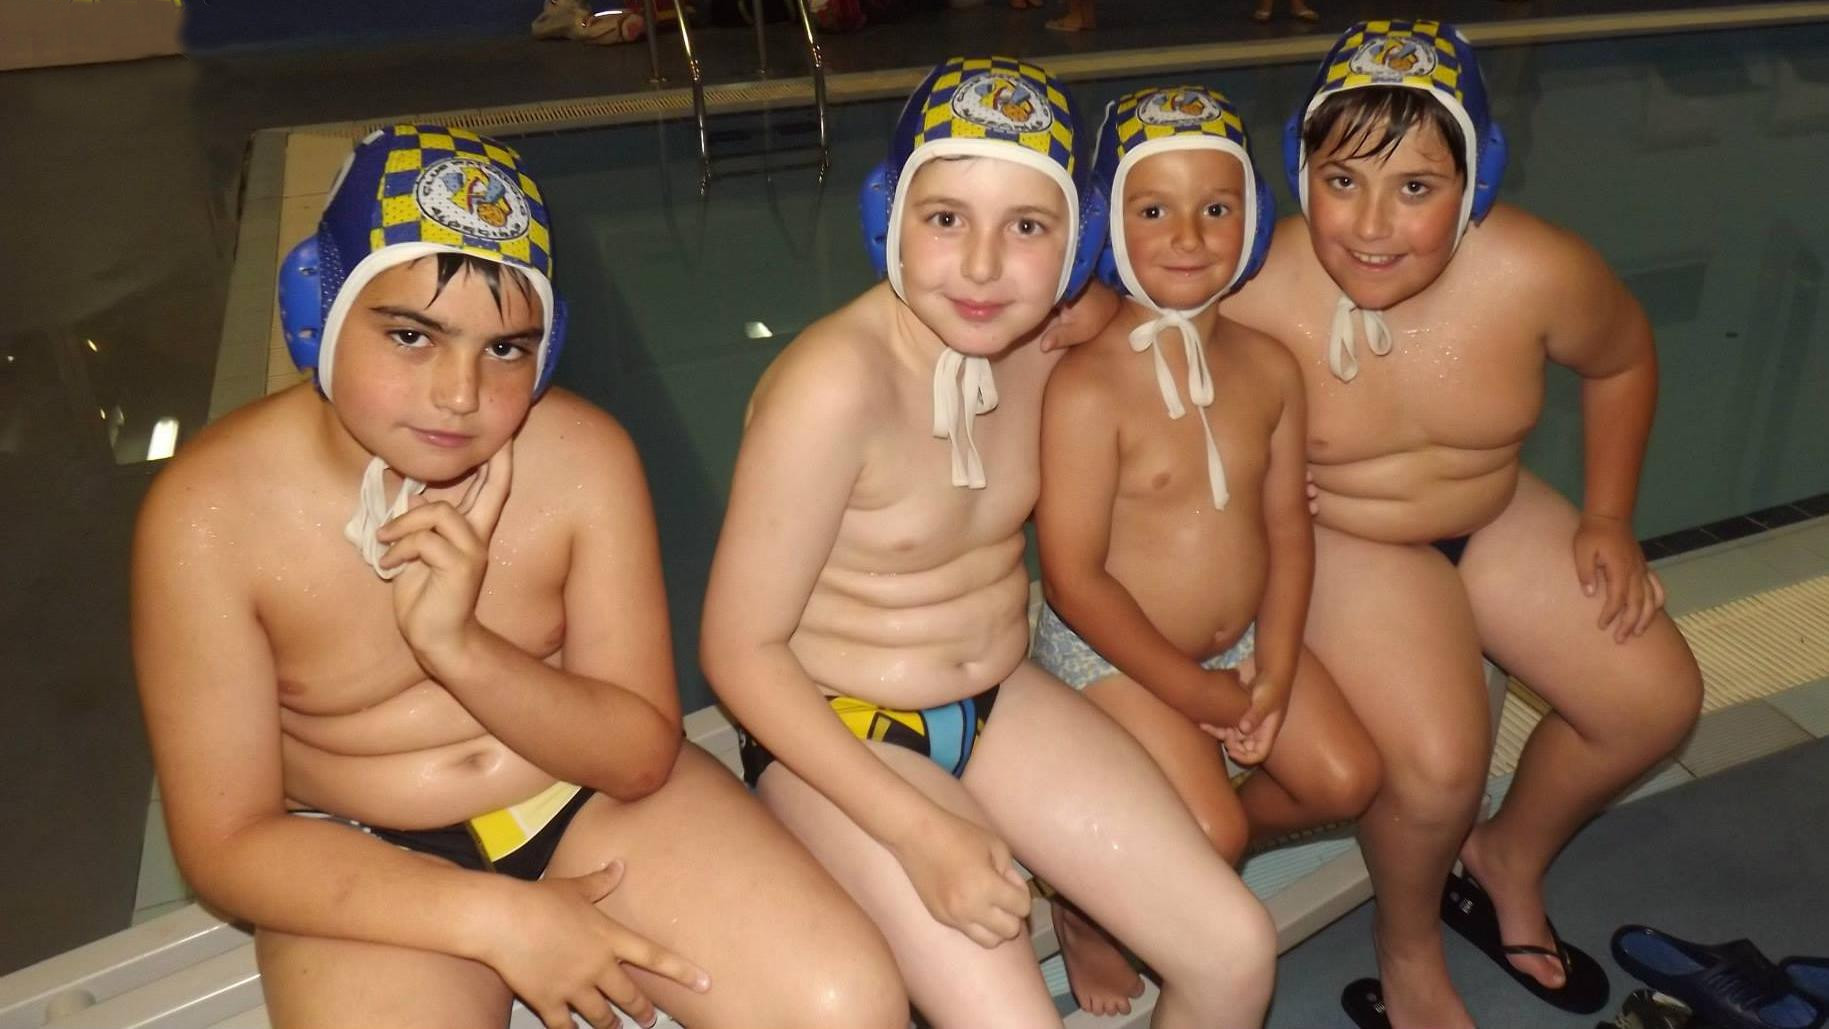 Waterpolo_Spain_Boys_are_fat_9.j